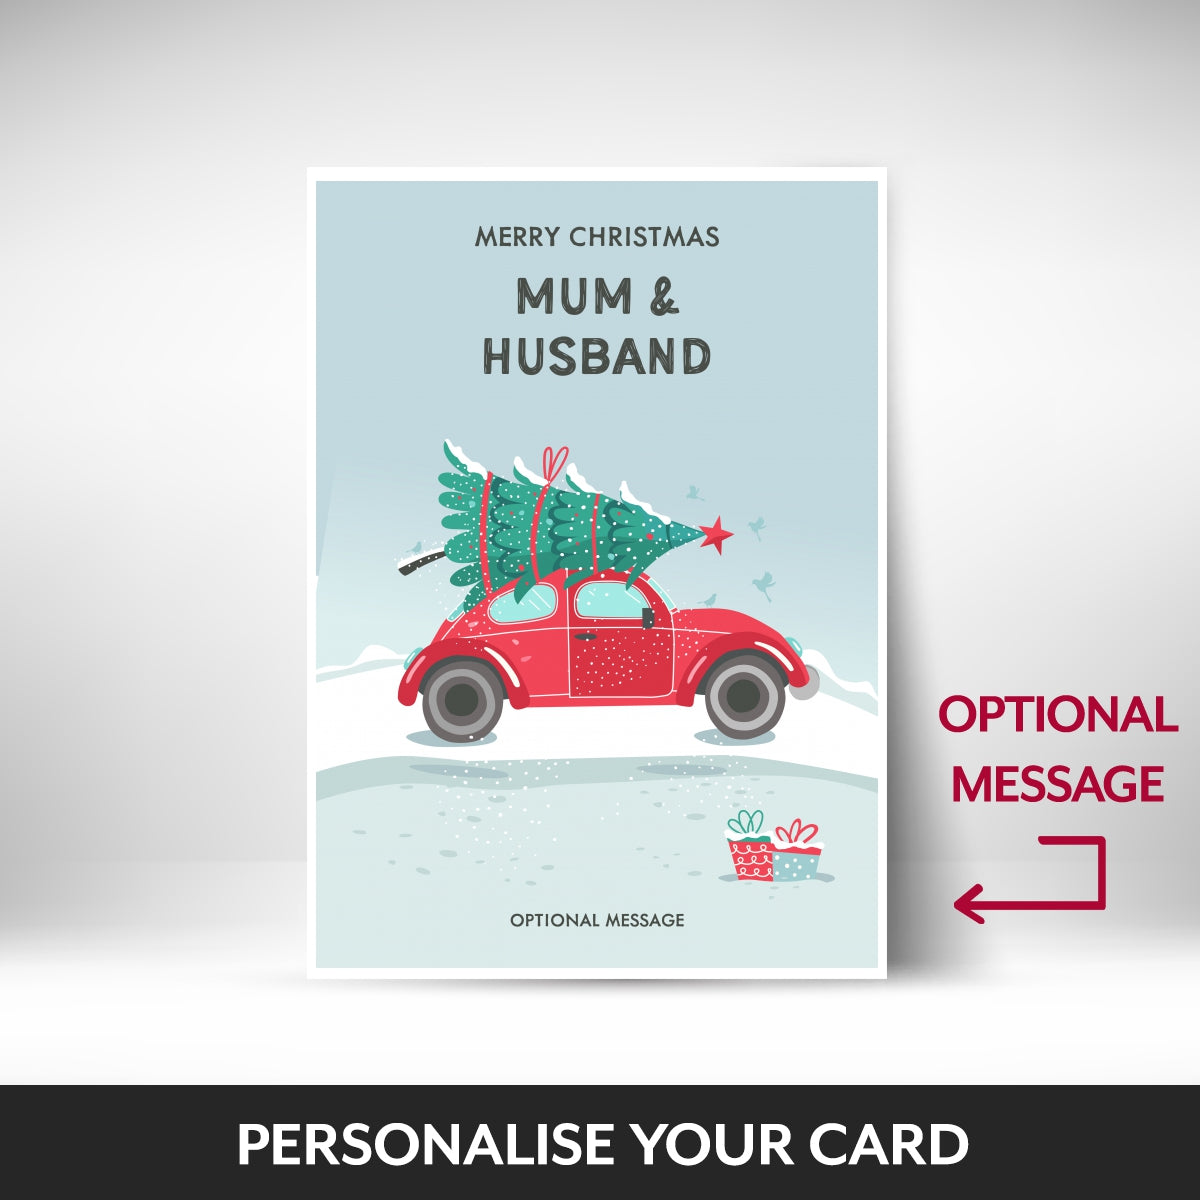 What can be personalised on this mum and husband christmas cards